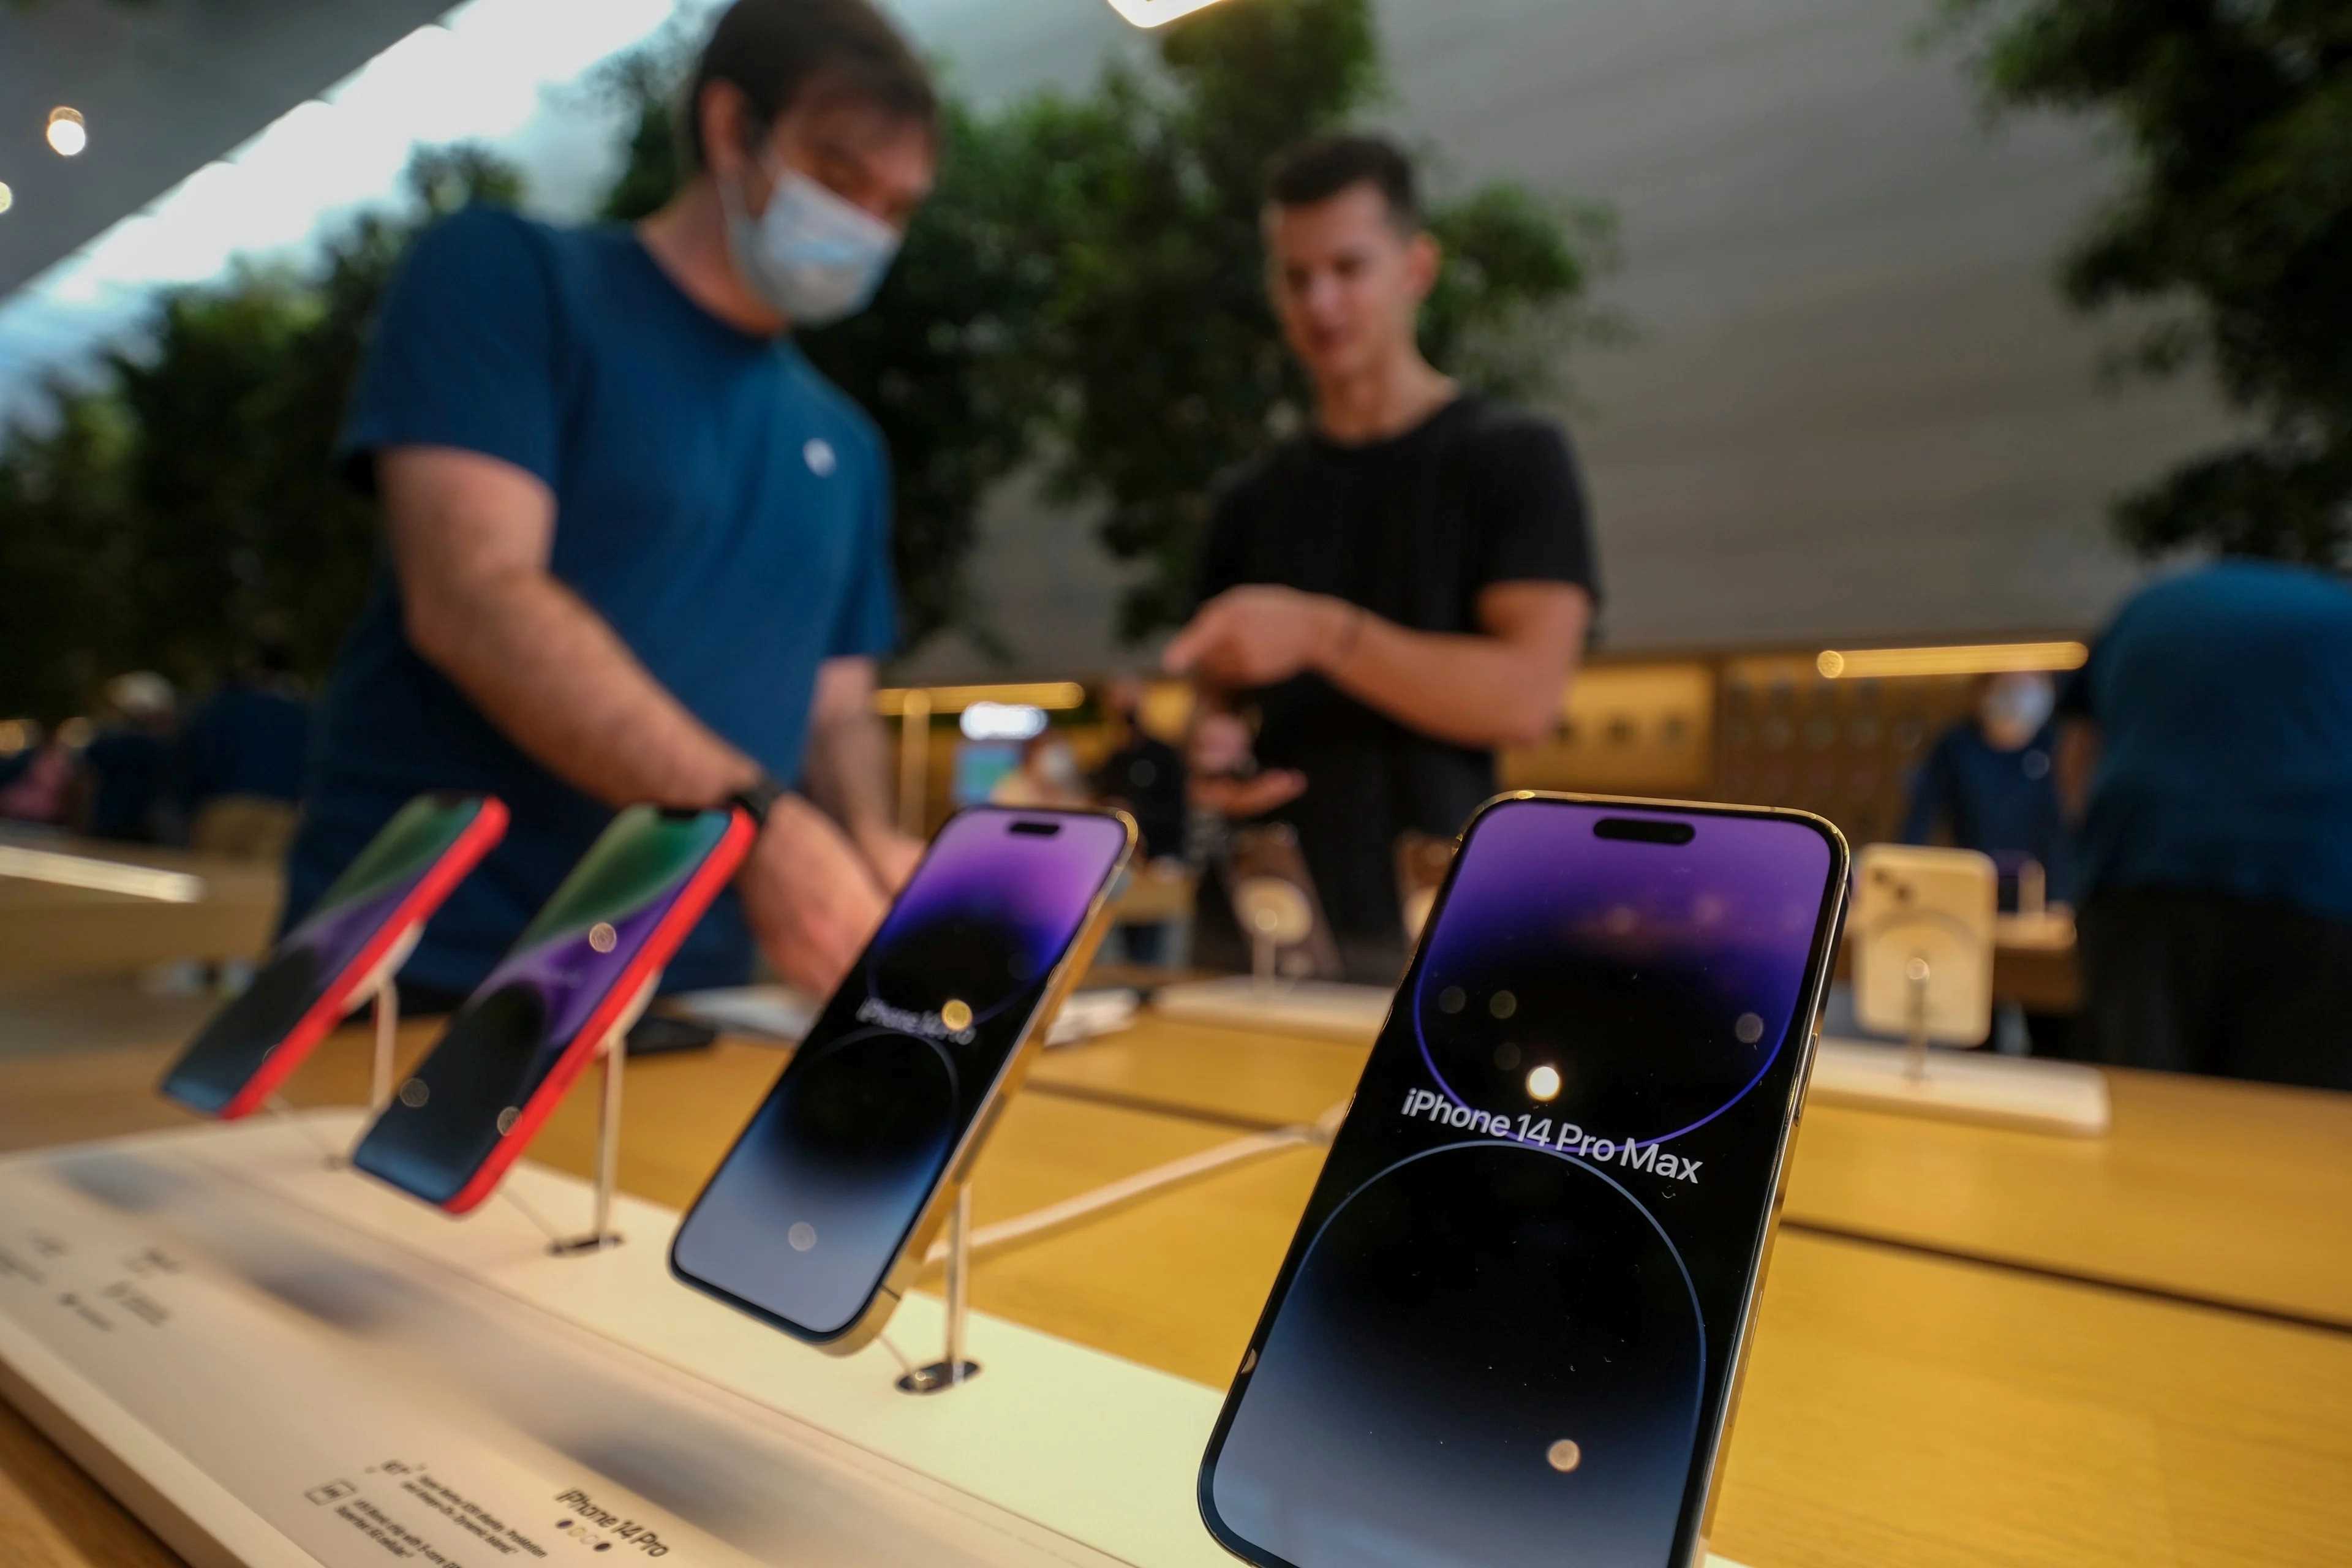 in-store-availability-knowing-when-iphone-14-is-available-for-in-store-purchase